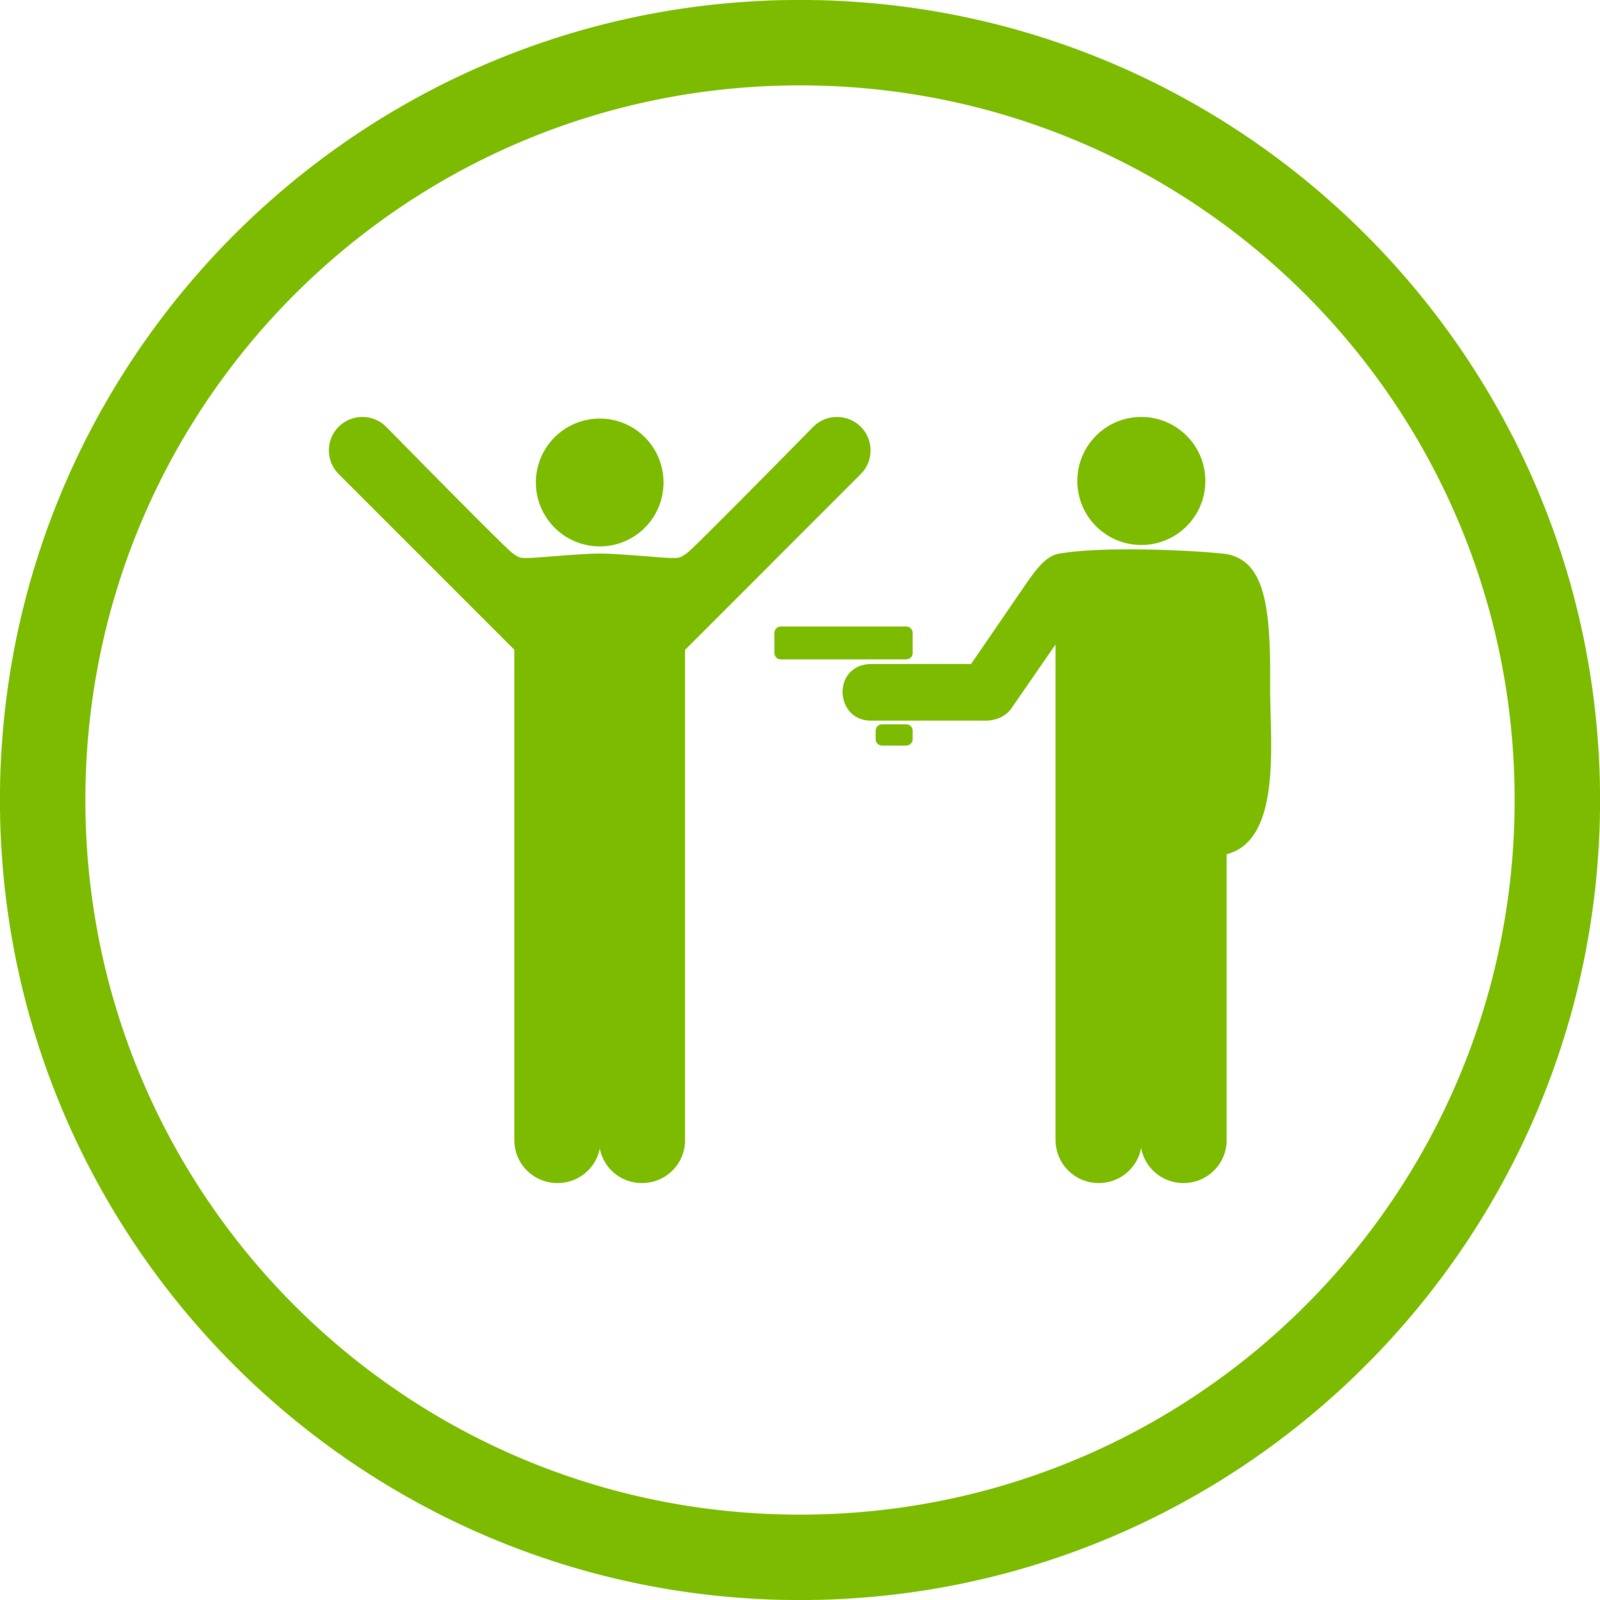 Crime vector icon. This rounded flat symbol is drawn with eco green color on a white background.